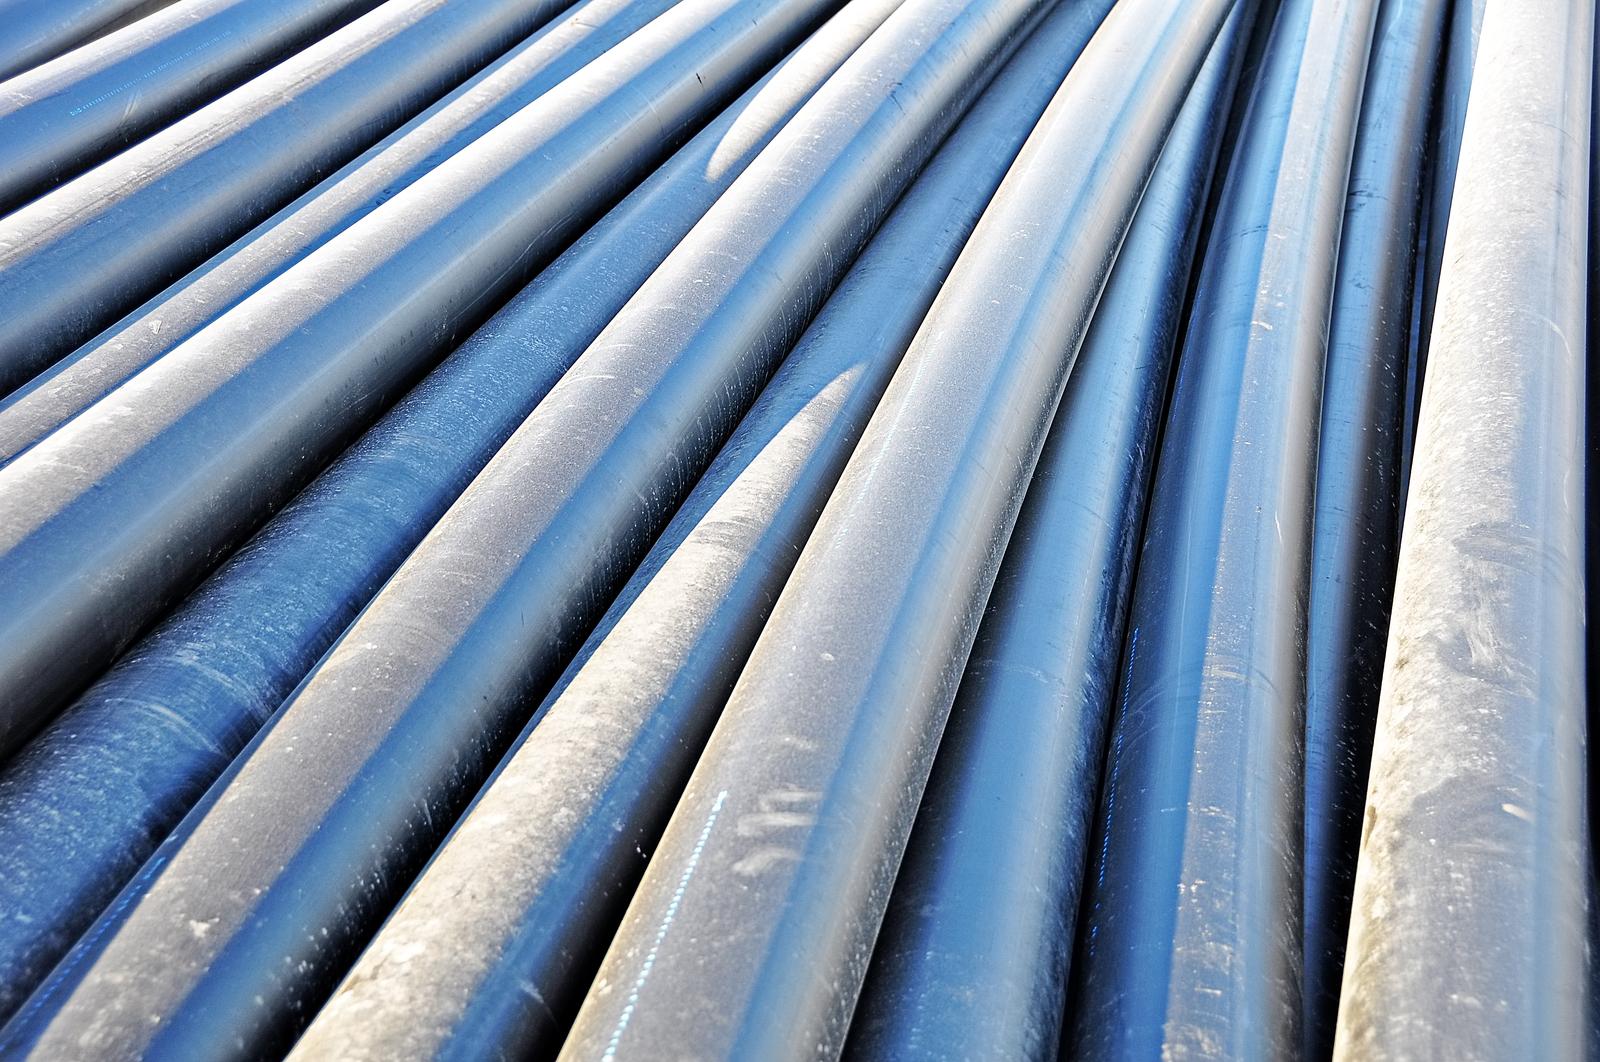 Manufacture of tubes, pipes, hollow profiles and related fittings, of steel   in Tallinn